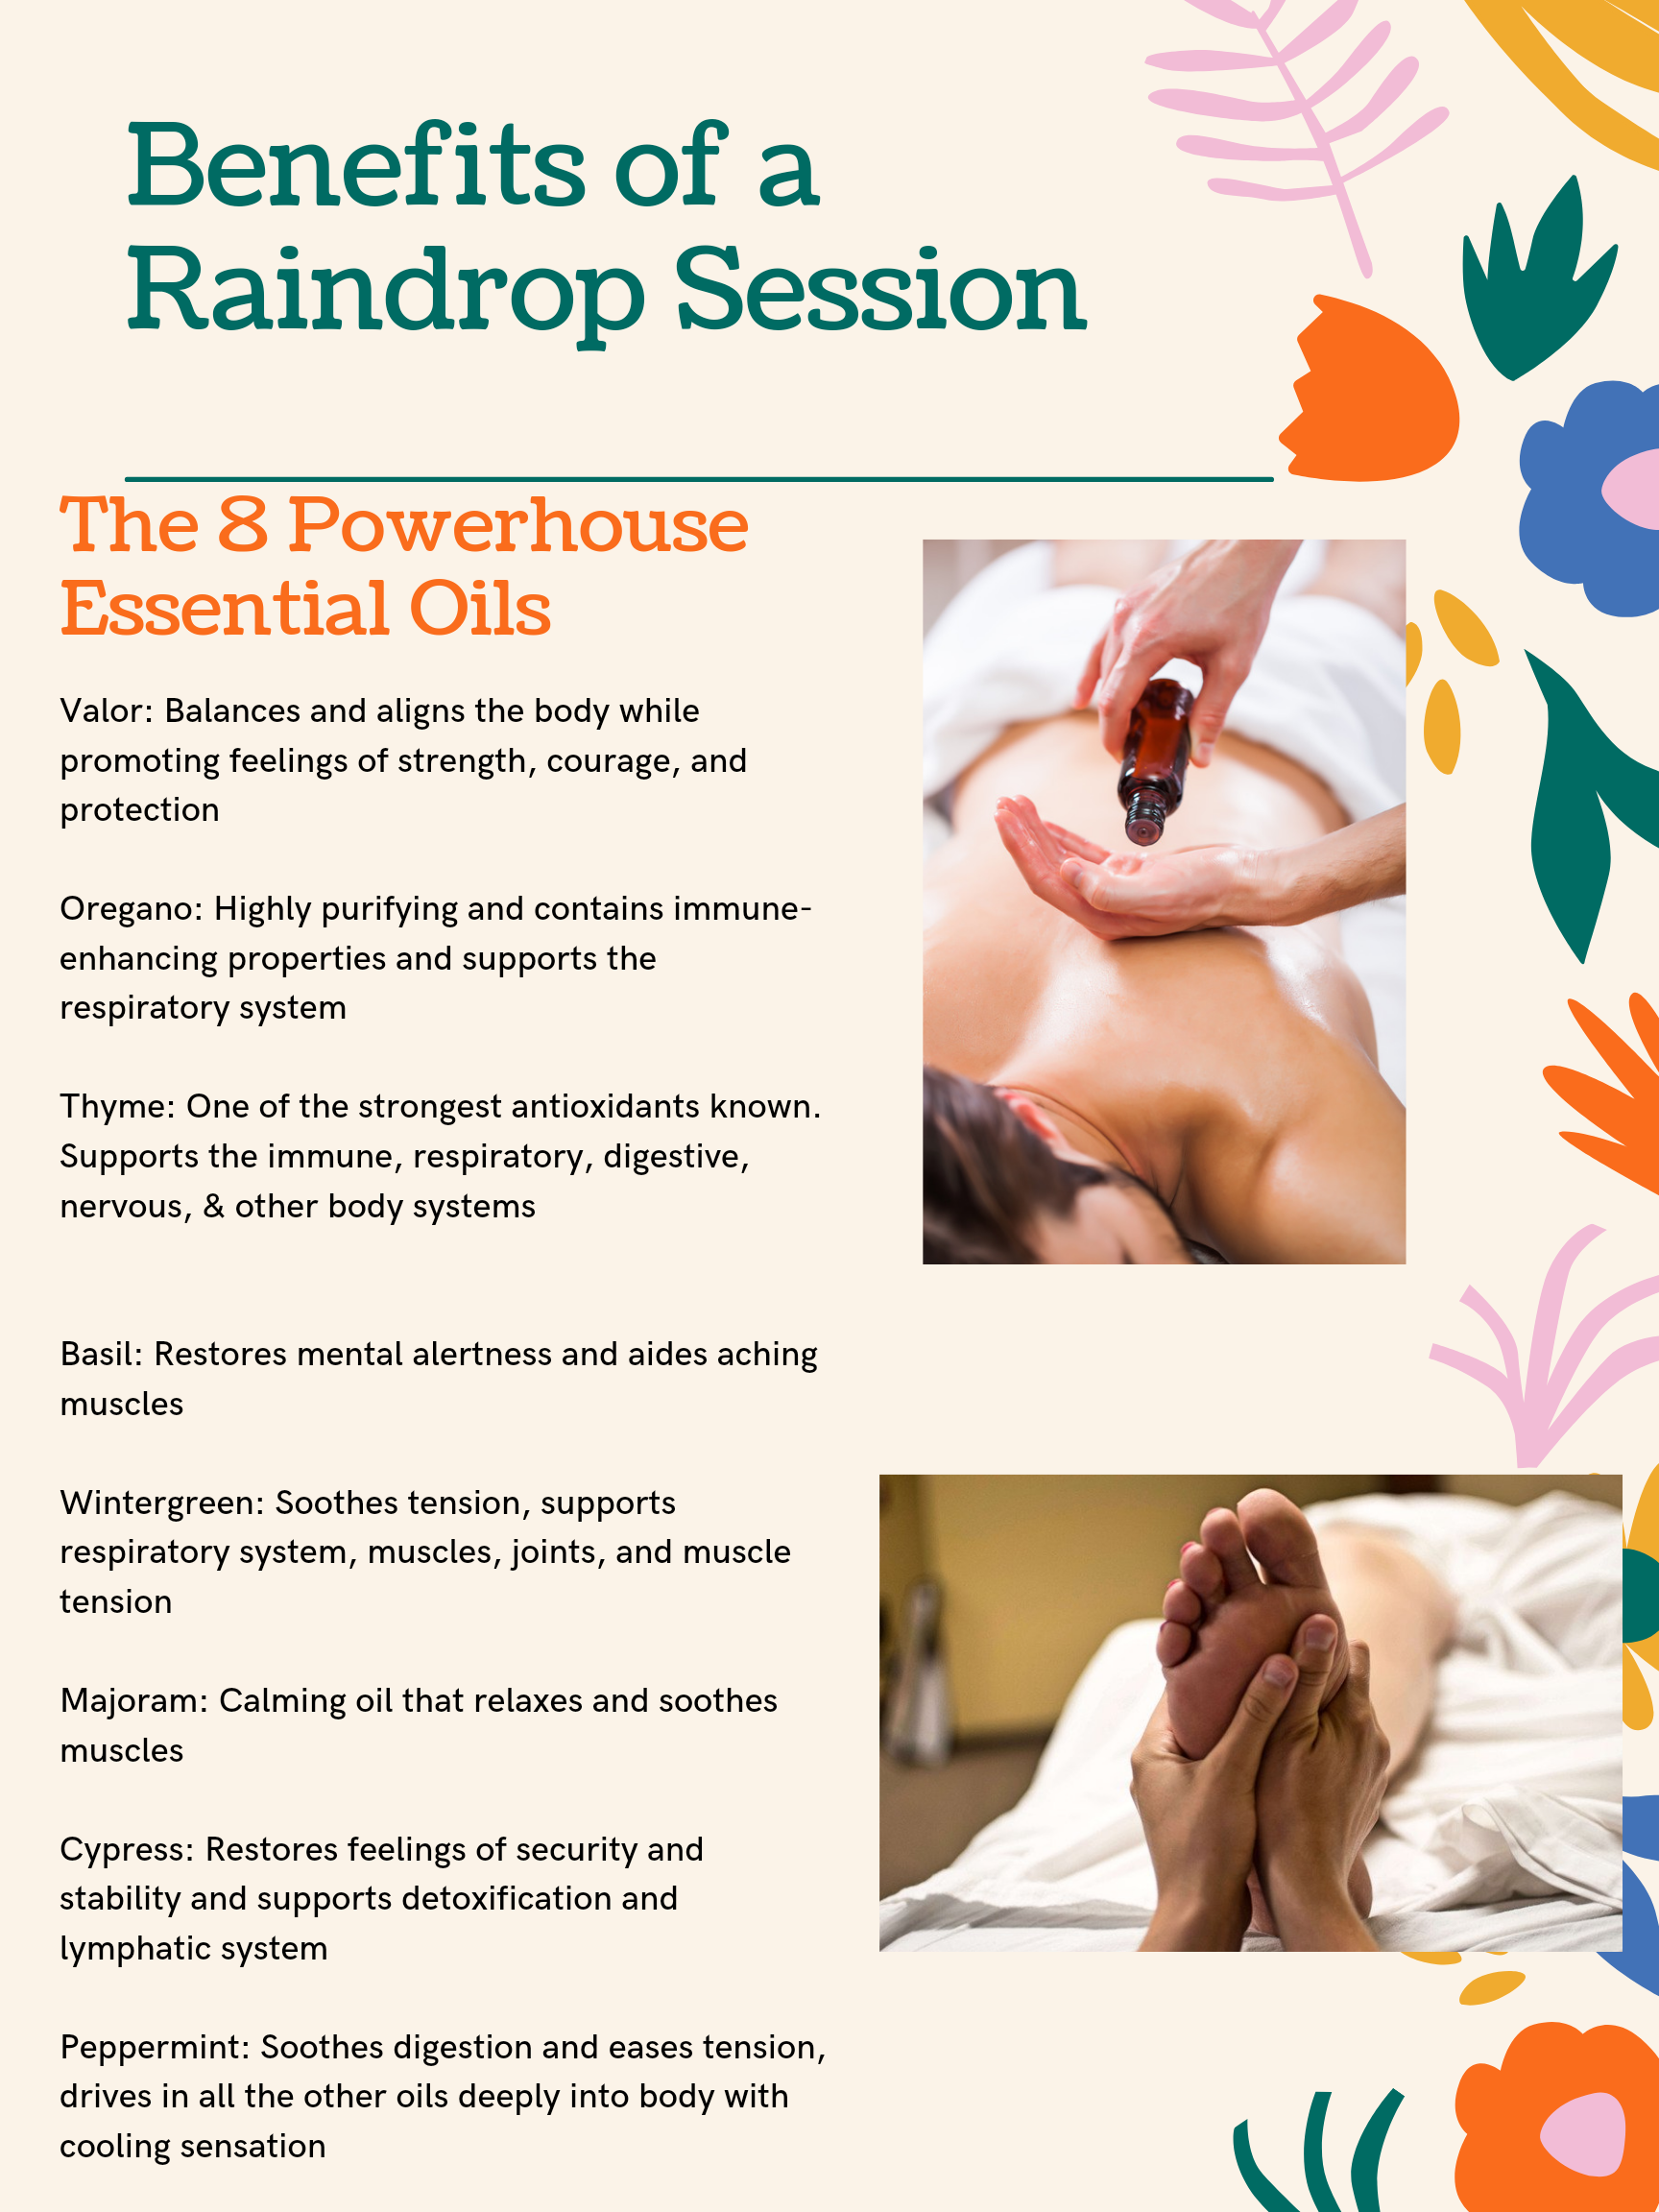 Benefits of a Raindrop Session informational poster